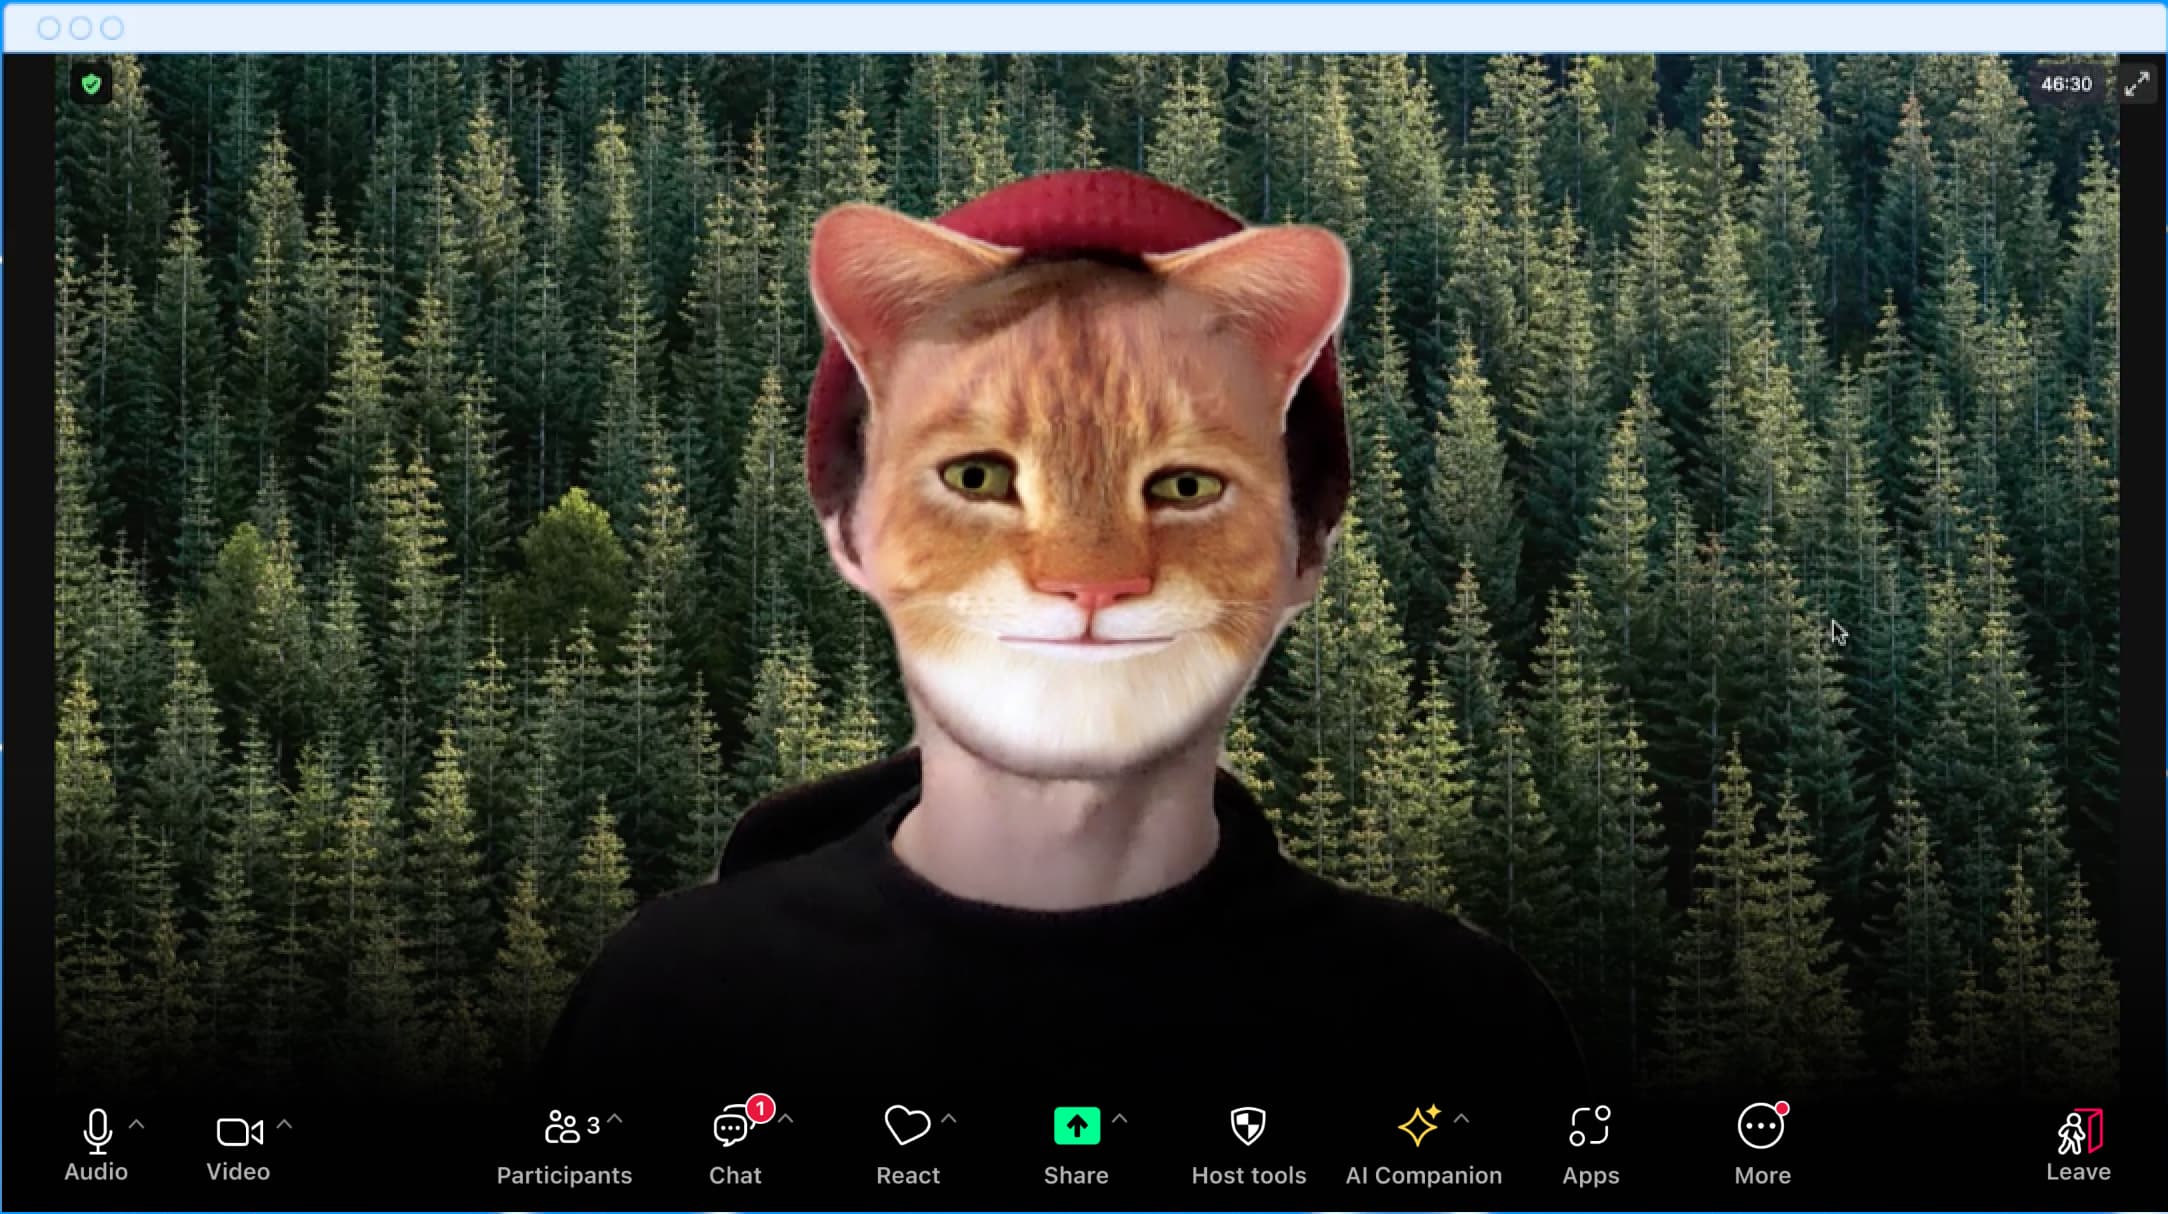 Man with the face of a cat on a Zoom call